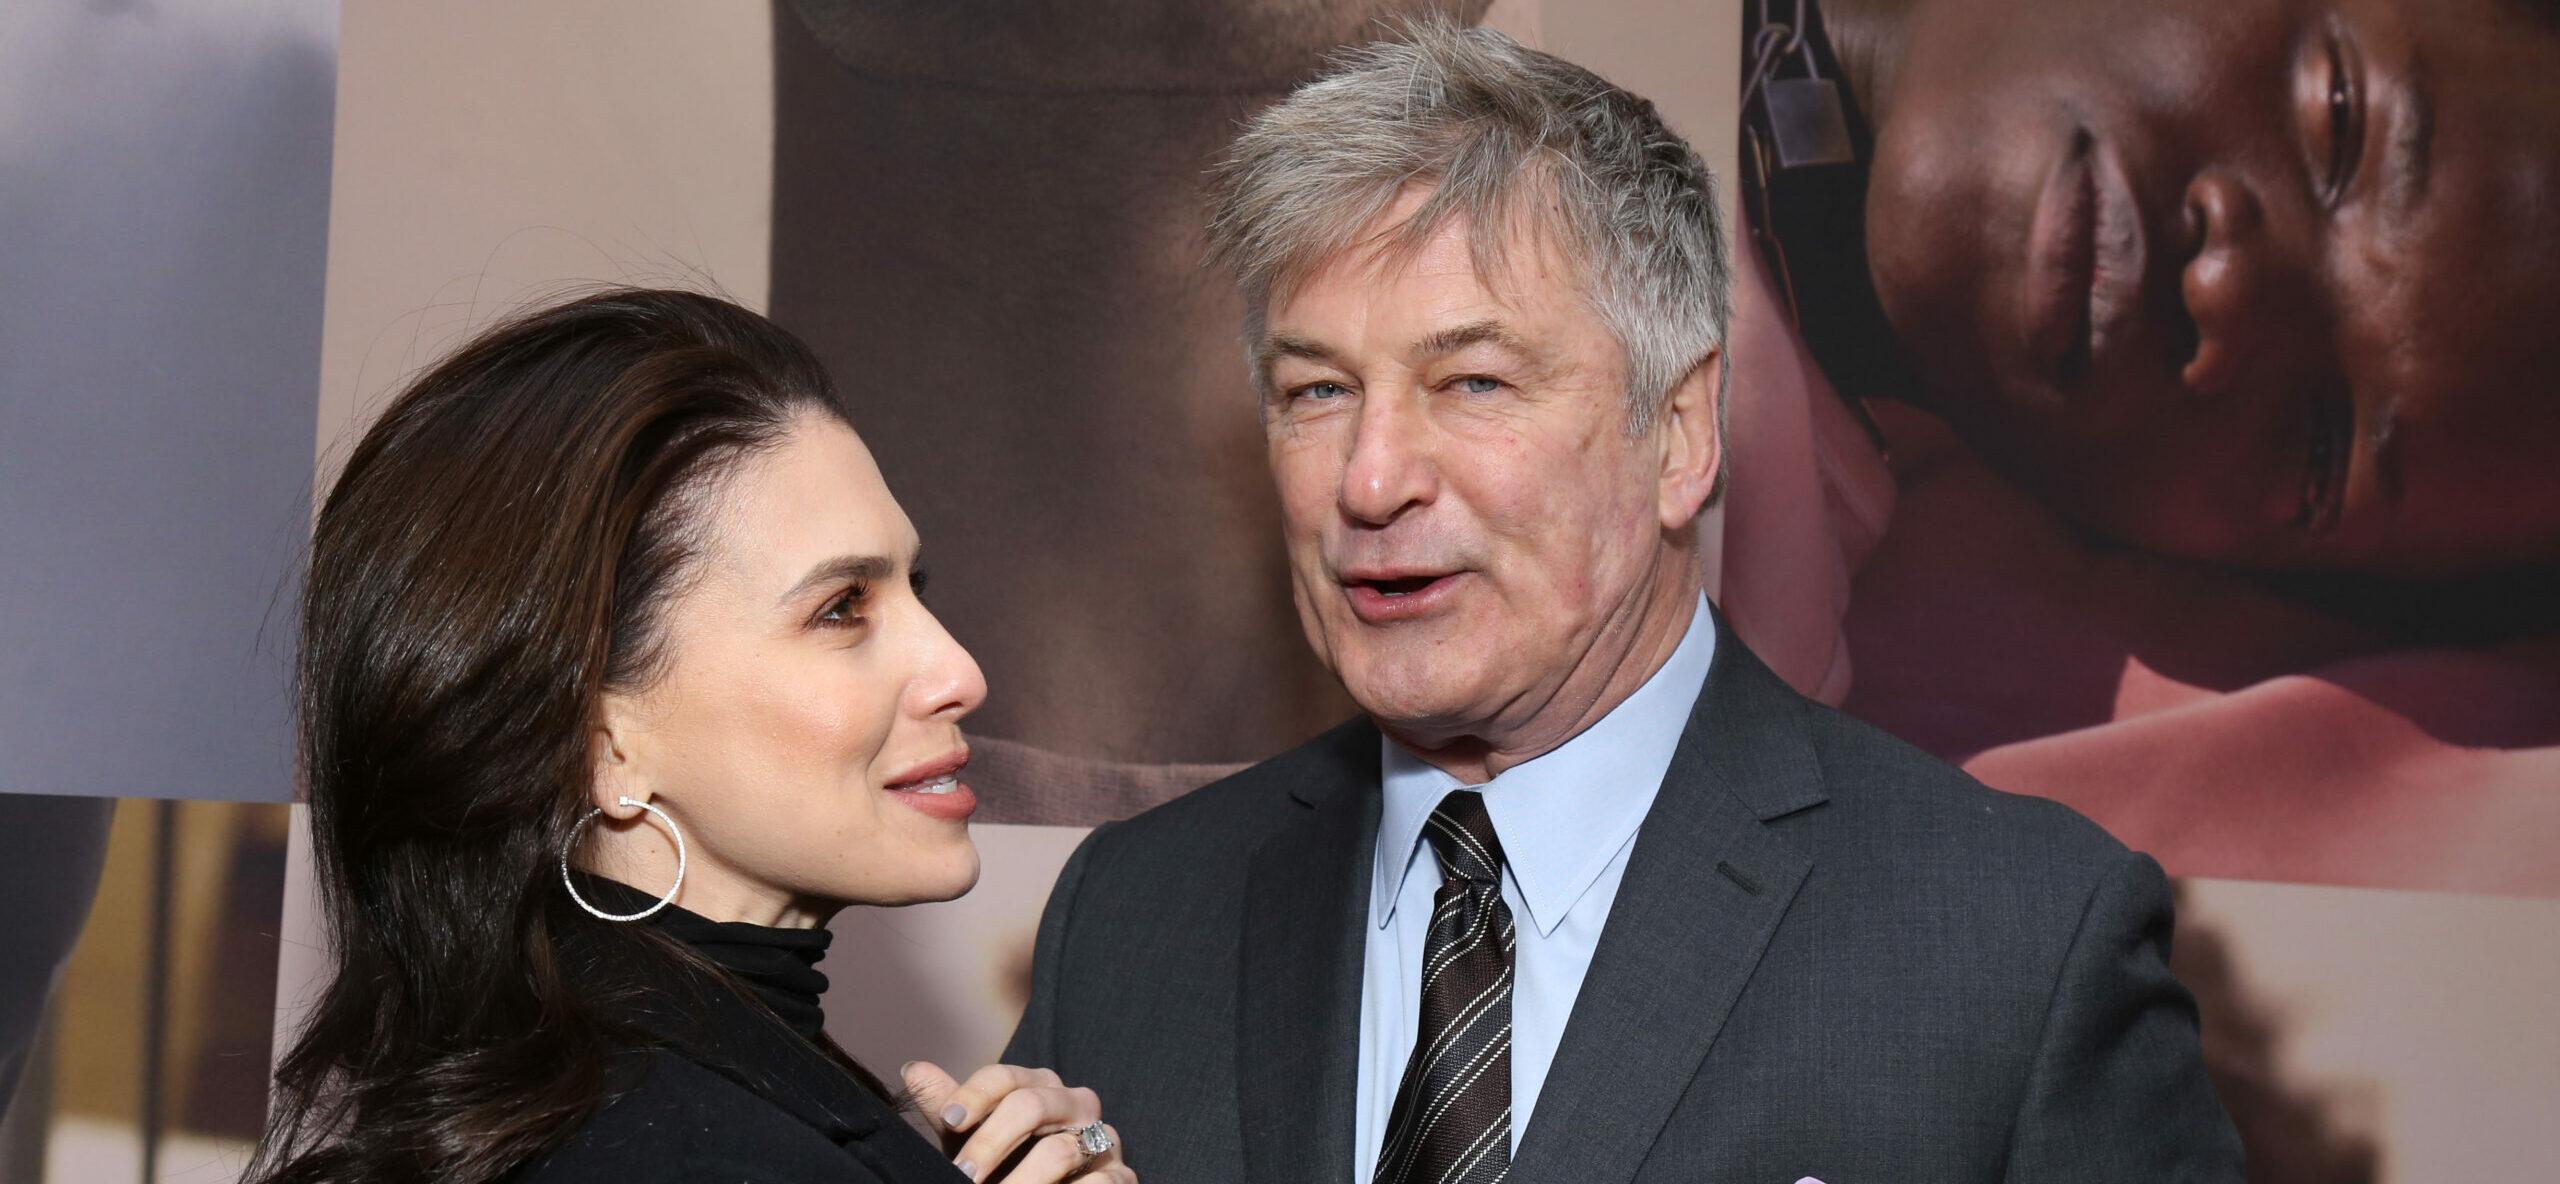 Hilaria Baldwin Pens Touching Message After Alec’s ‘Rust’ Shooting Interview